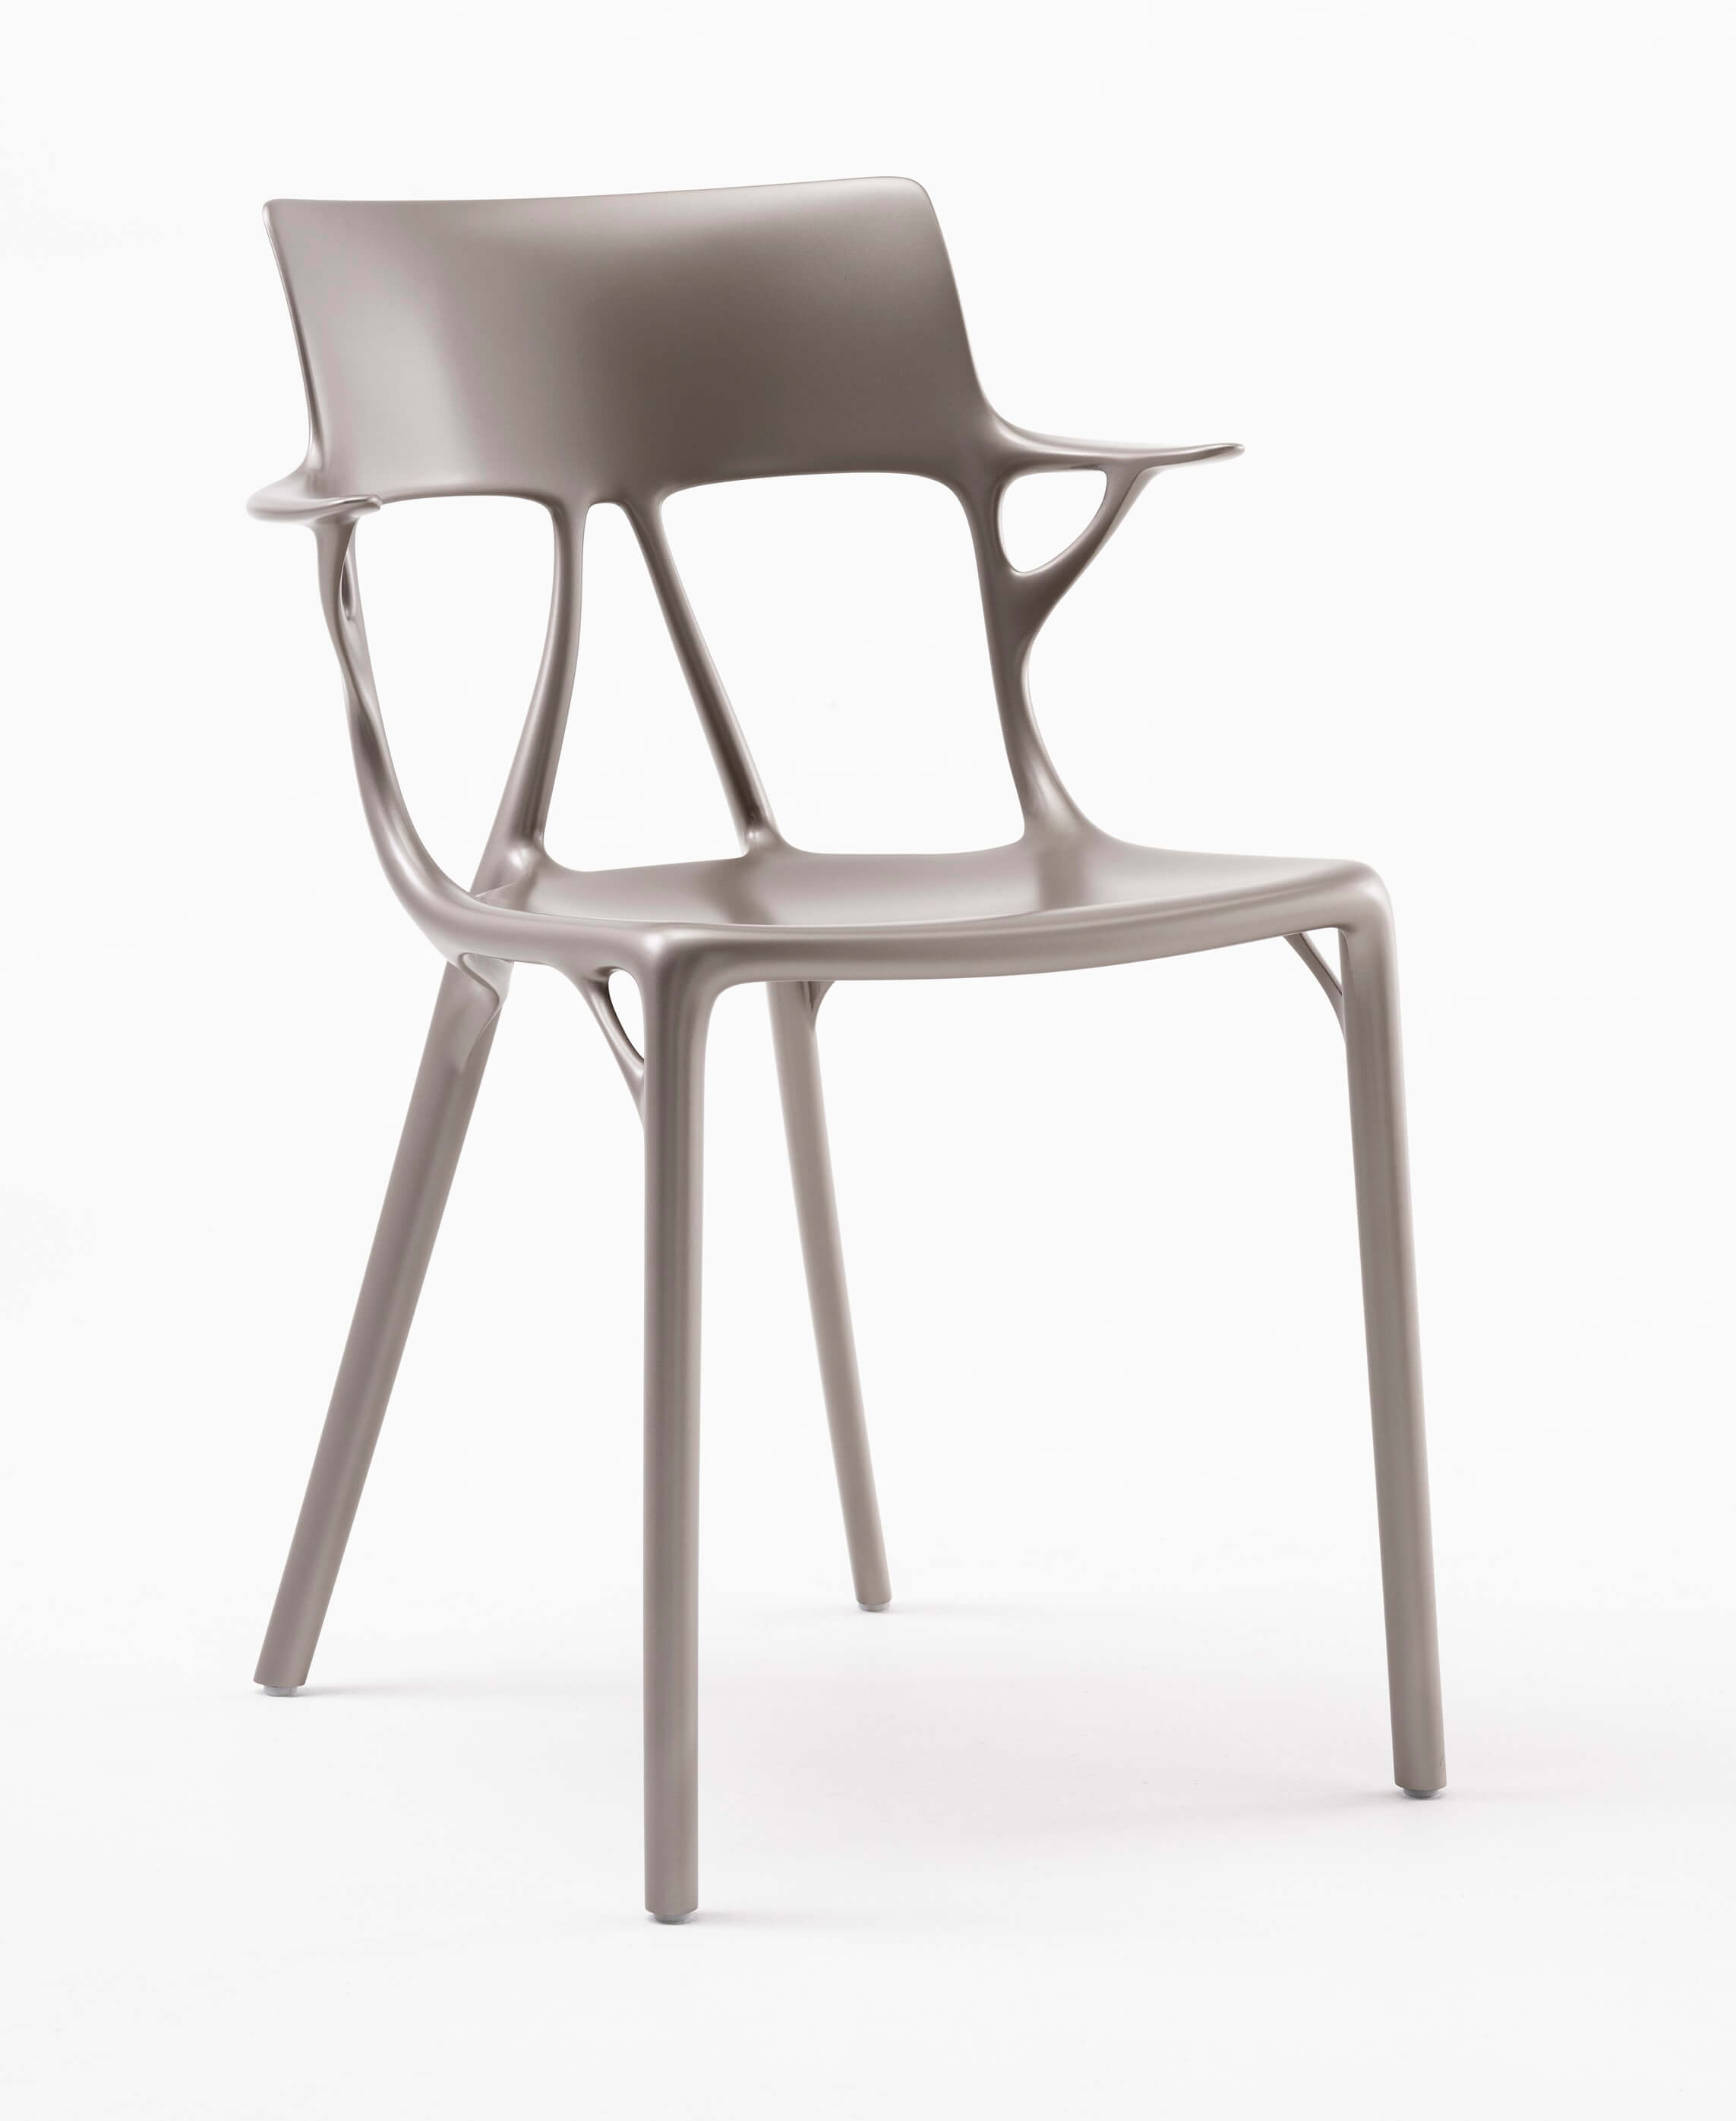 A I BY PHILIPPE STARCK